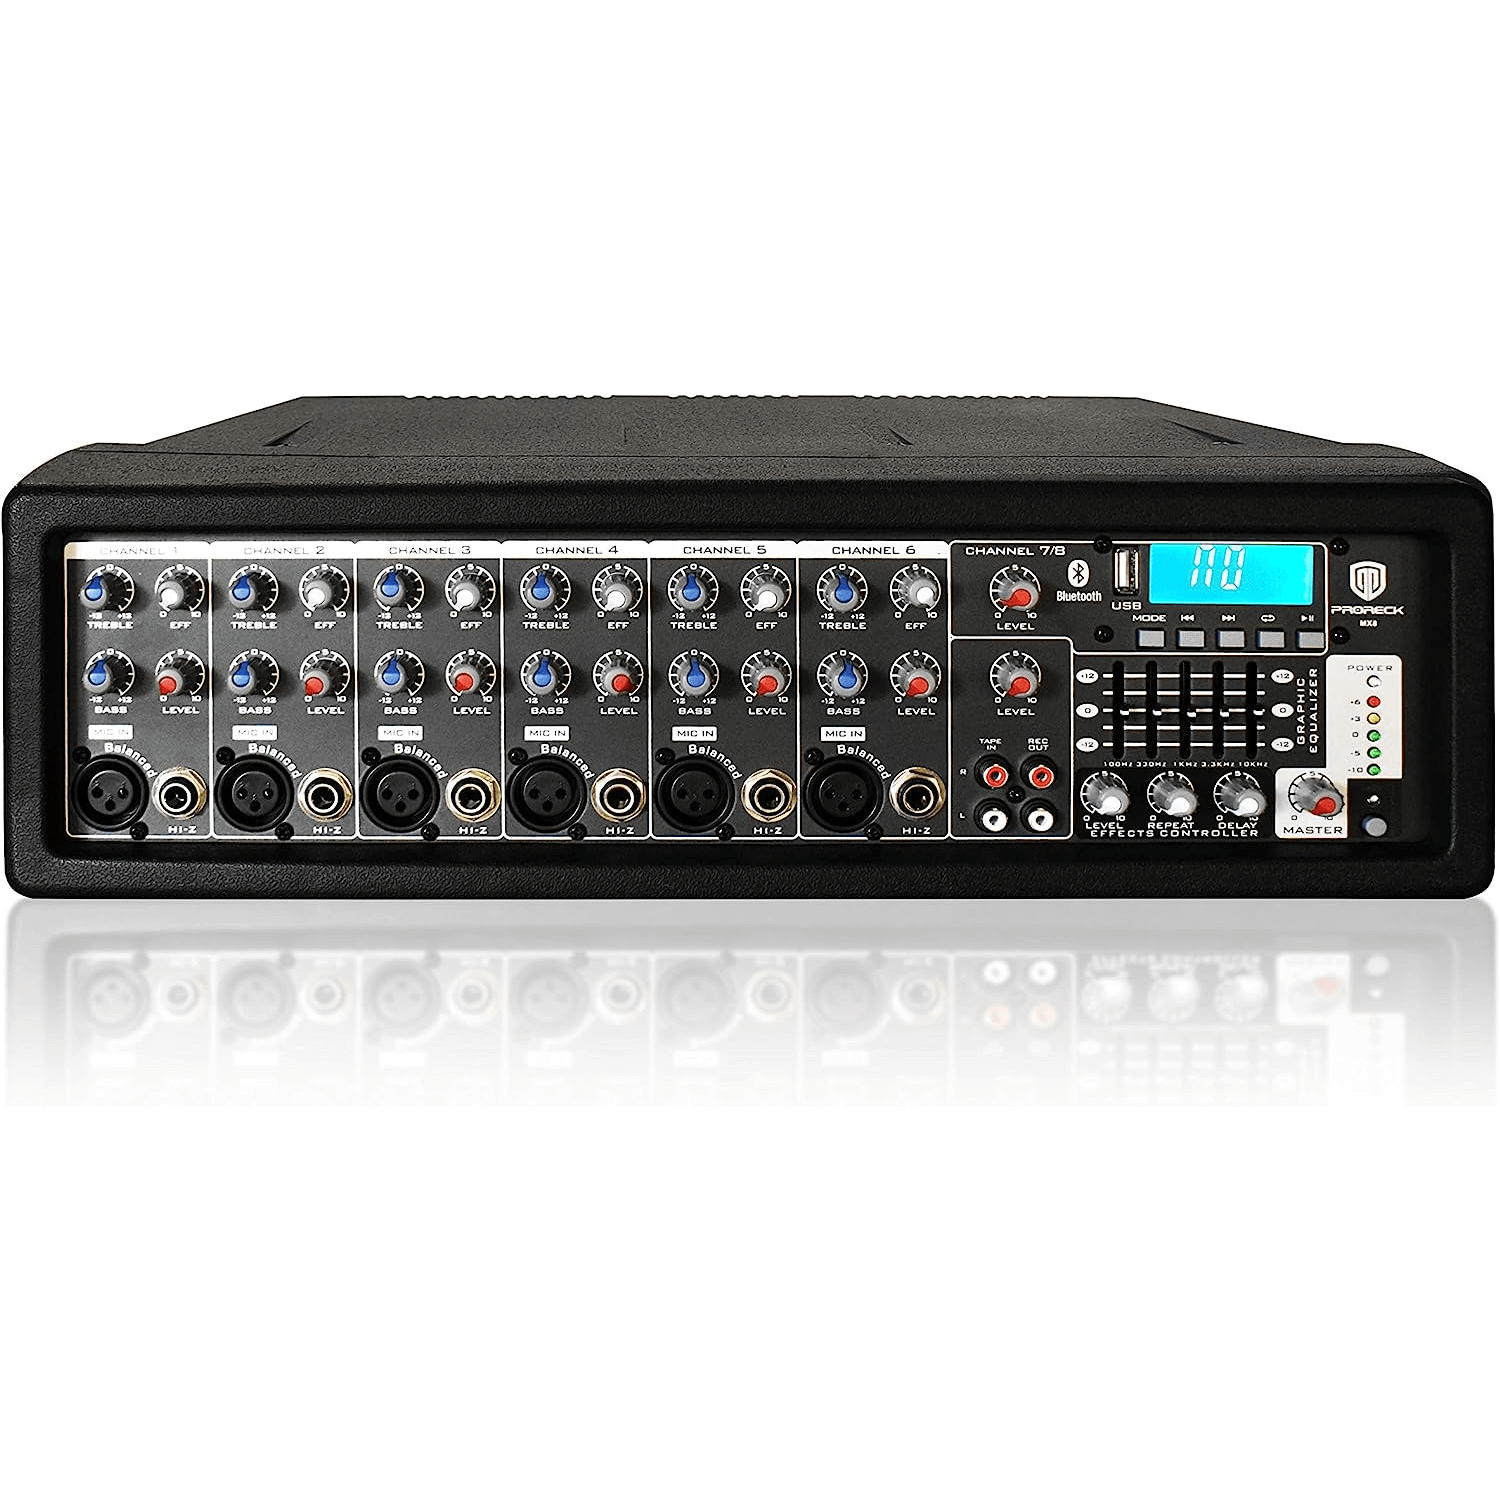 PRORECK MX8 | Audio Mixer 8 Channel|Compact audio mixer with usb/bluetooth